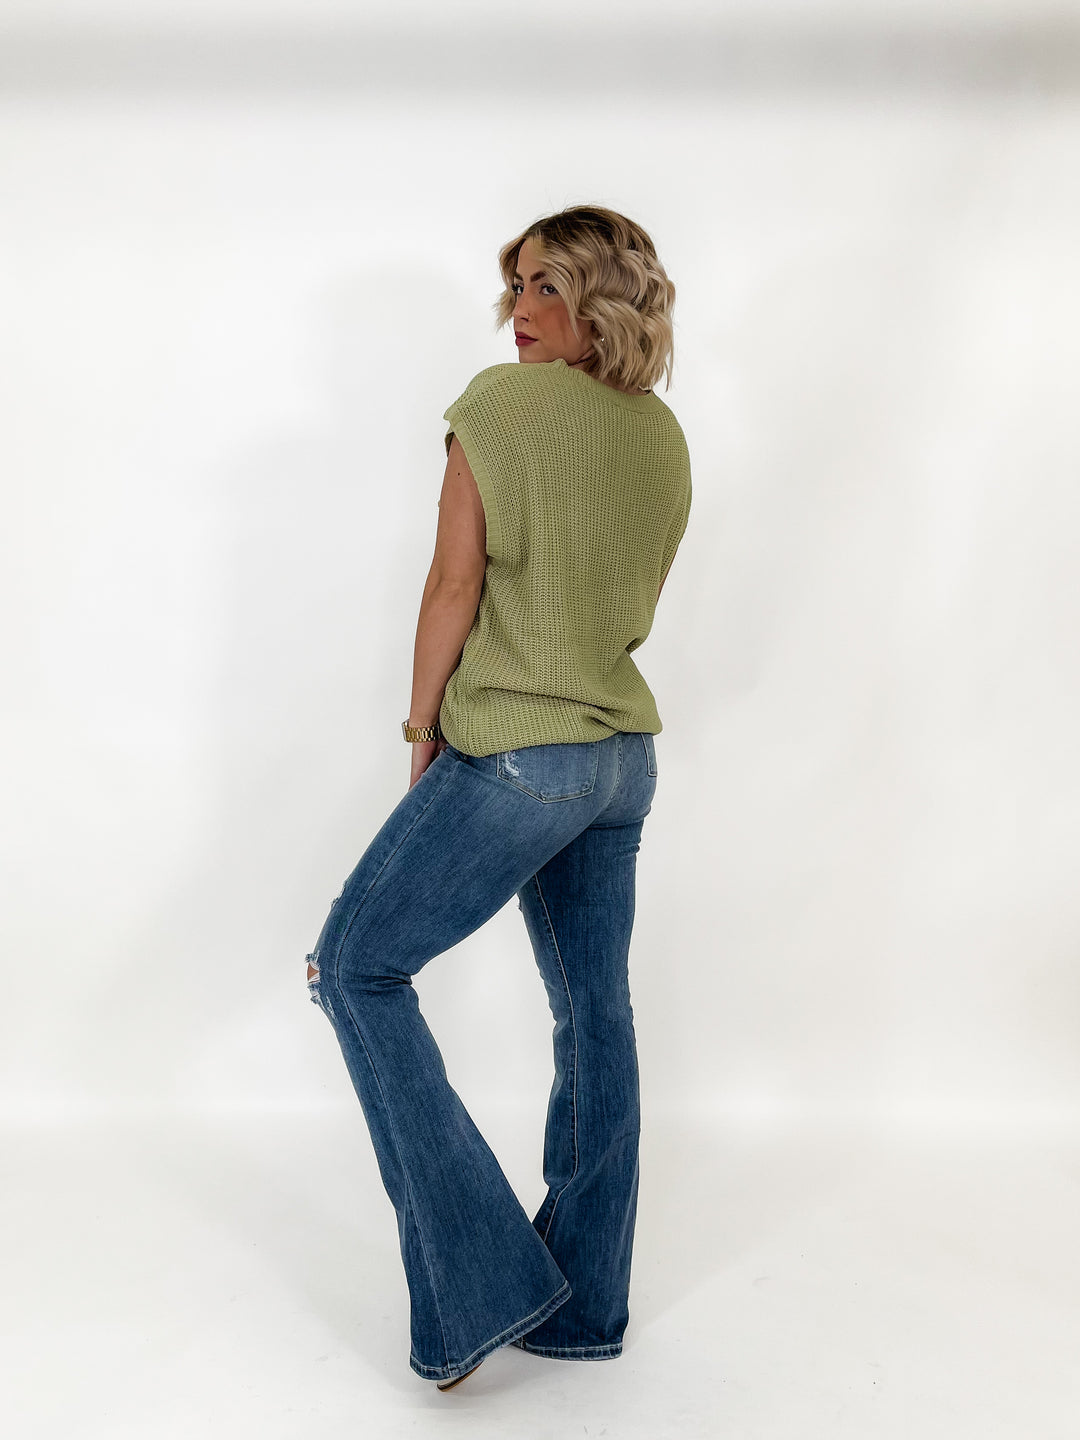 Cozette High Rise Distressed Flare, Light Wash